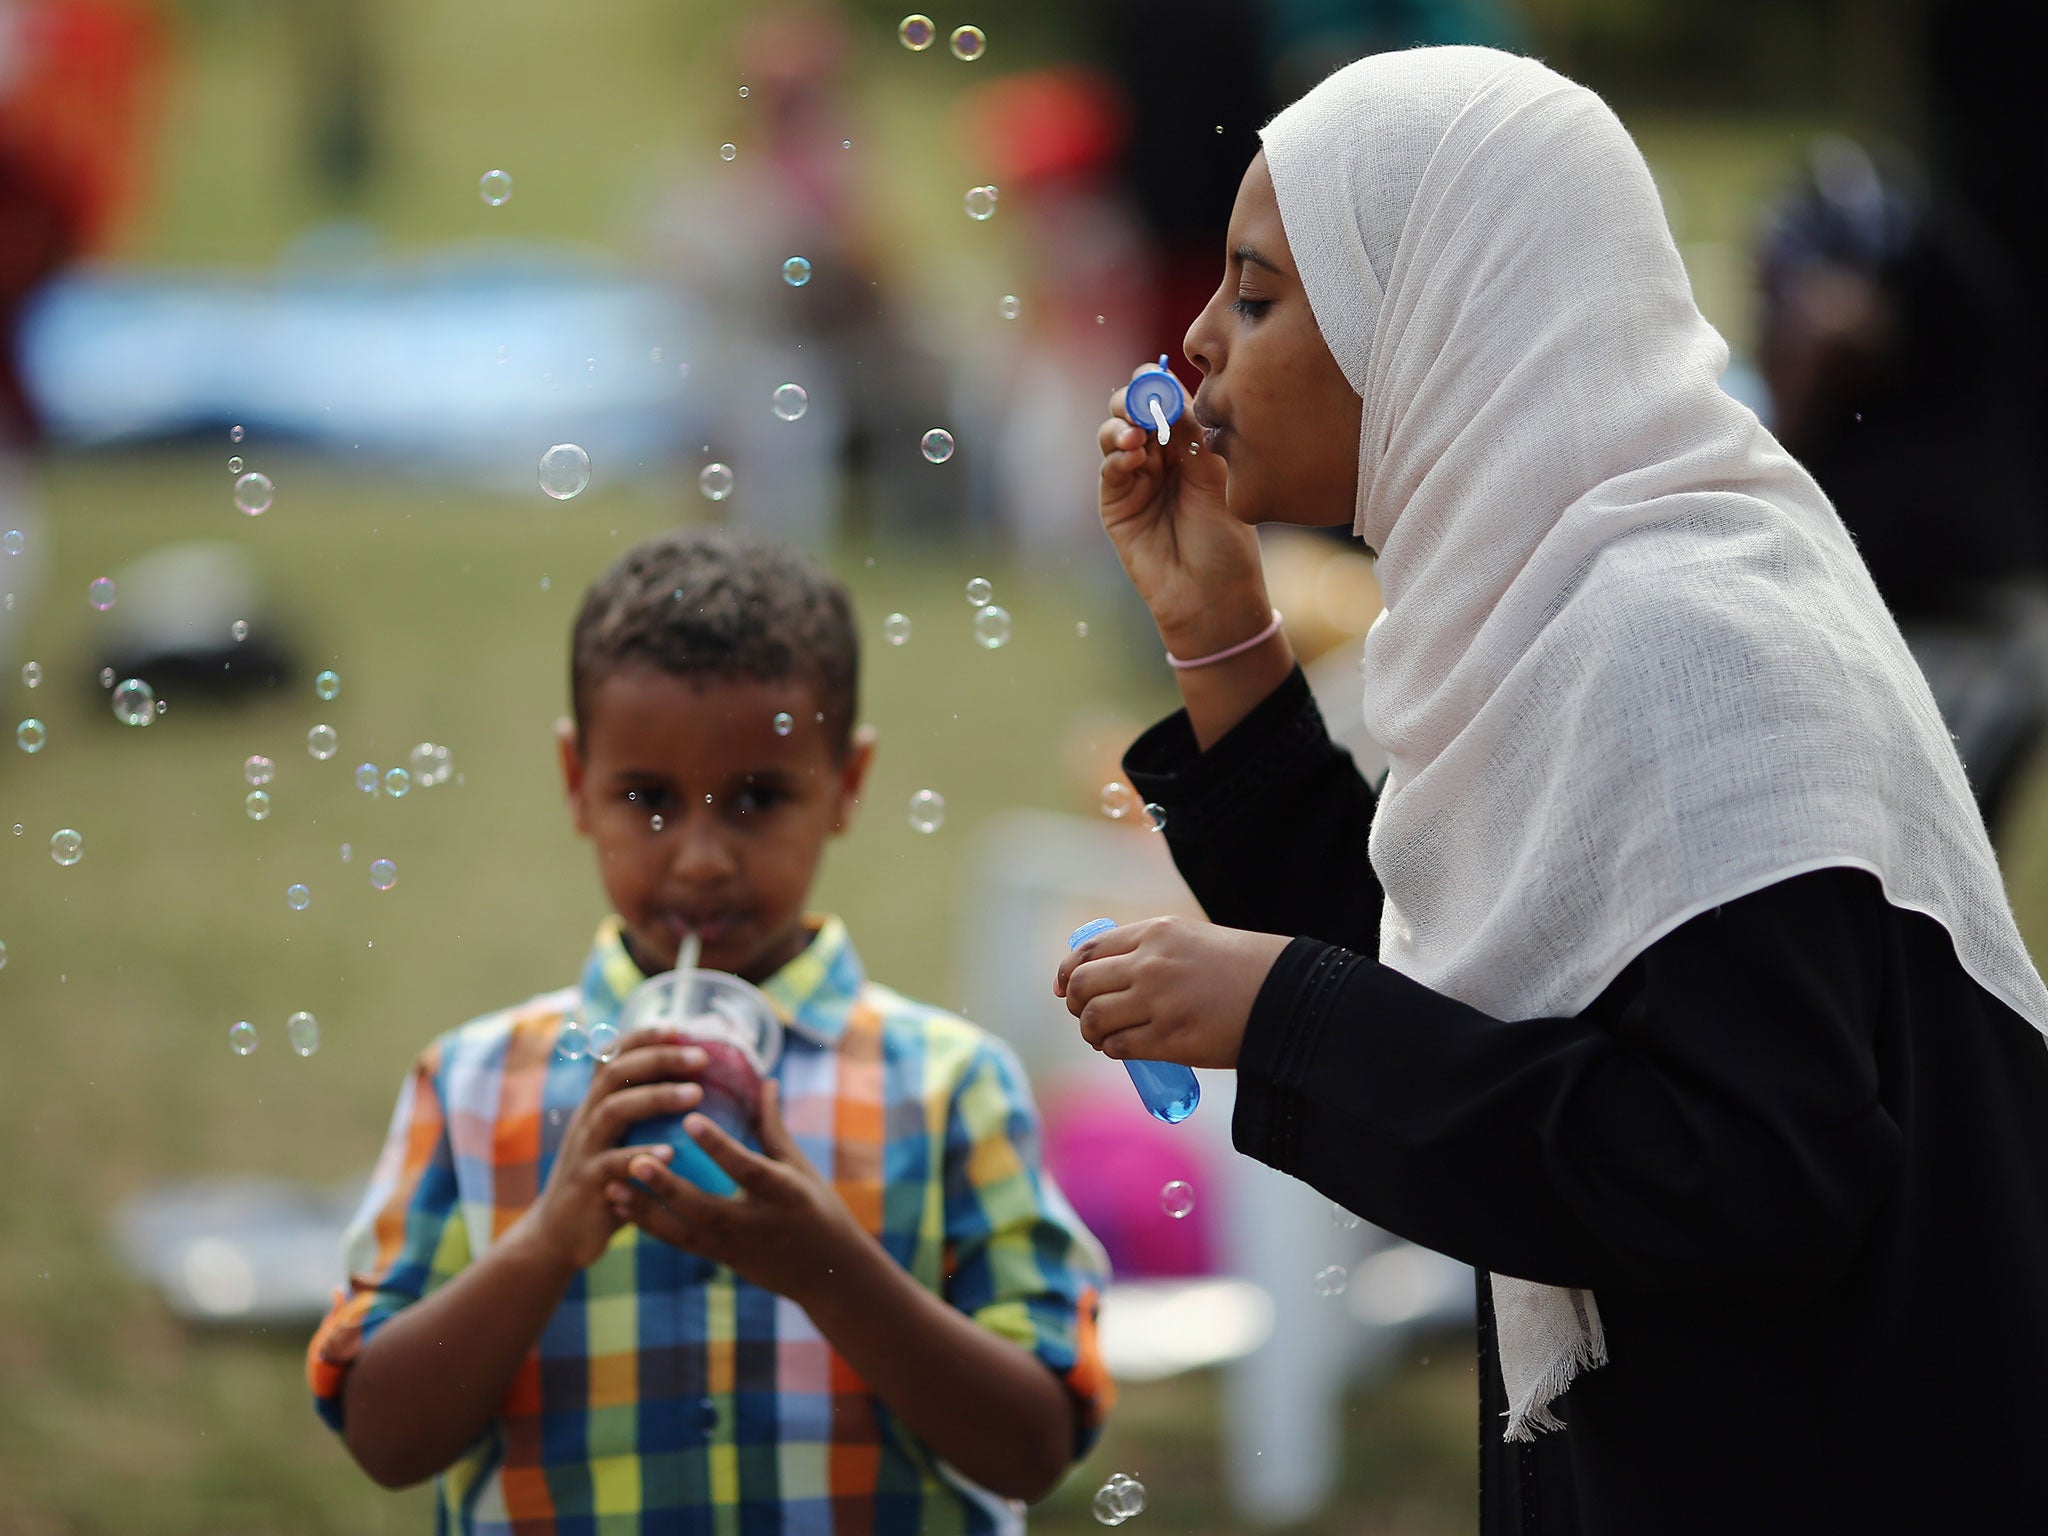 A girl blows bubbles during an Eid celebration in Burgess Park, London (Image: Getty)